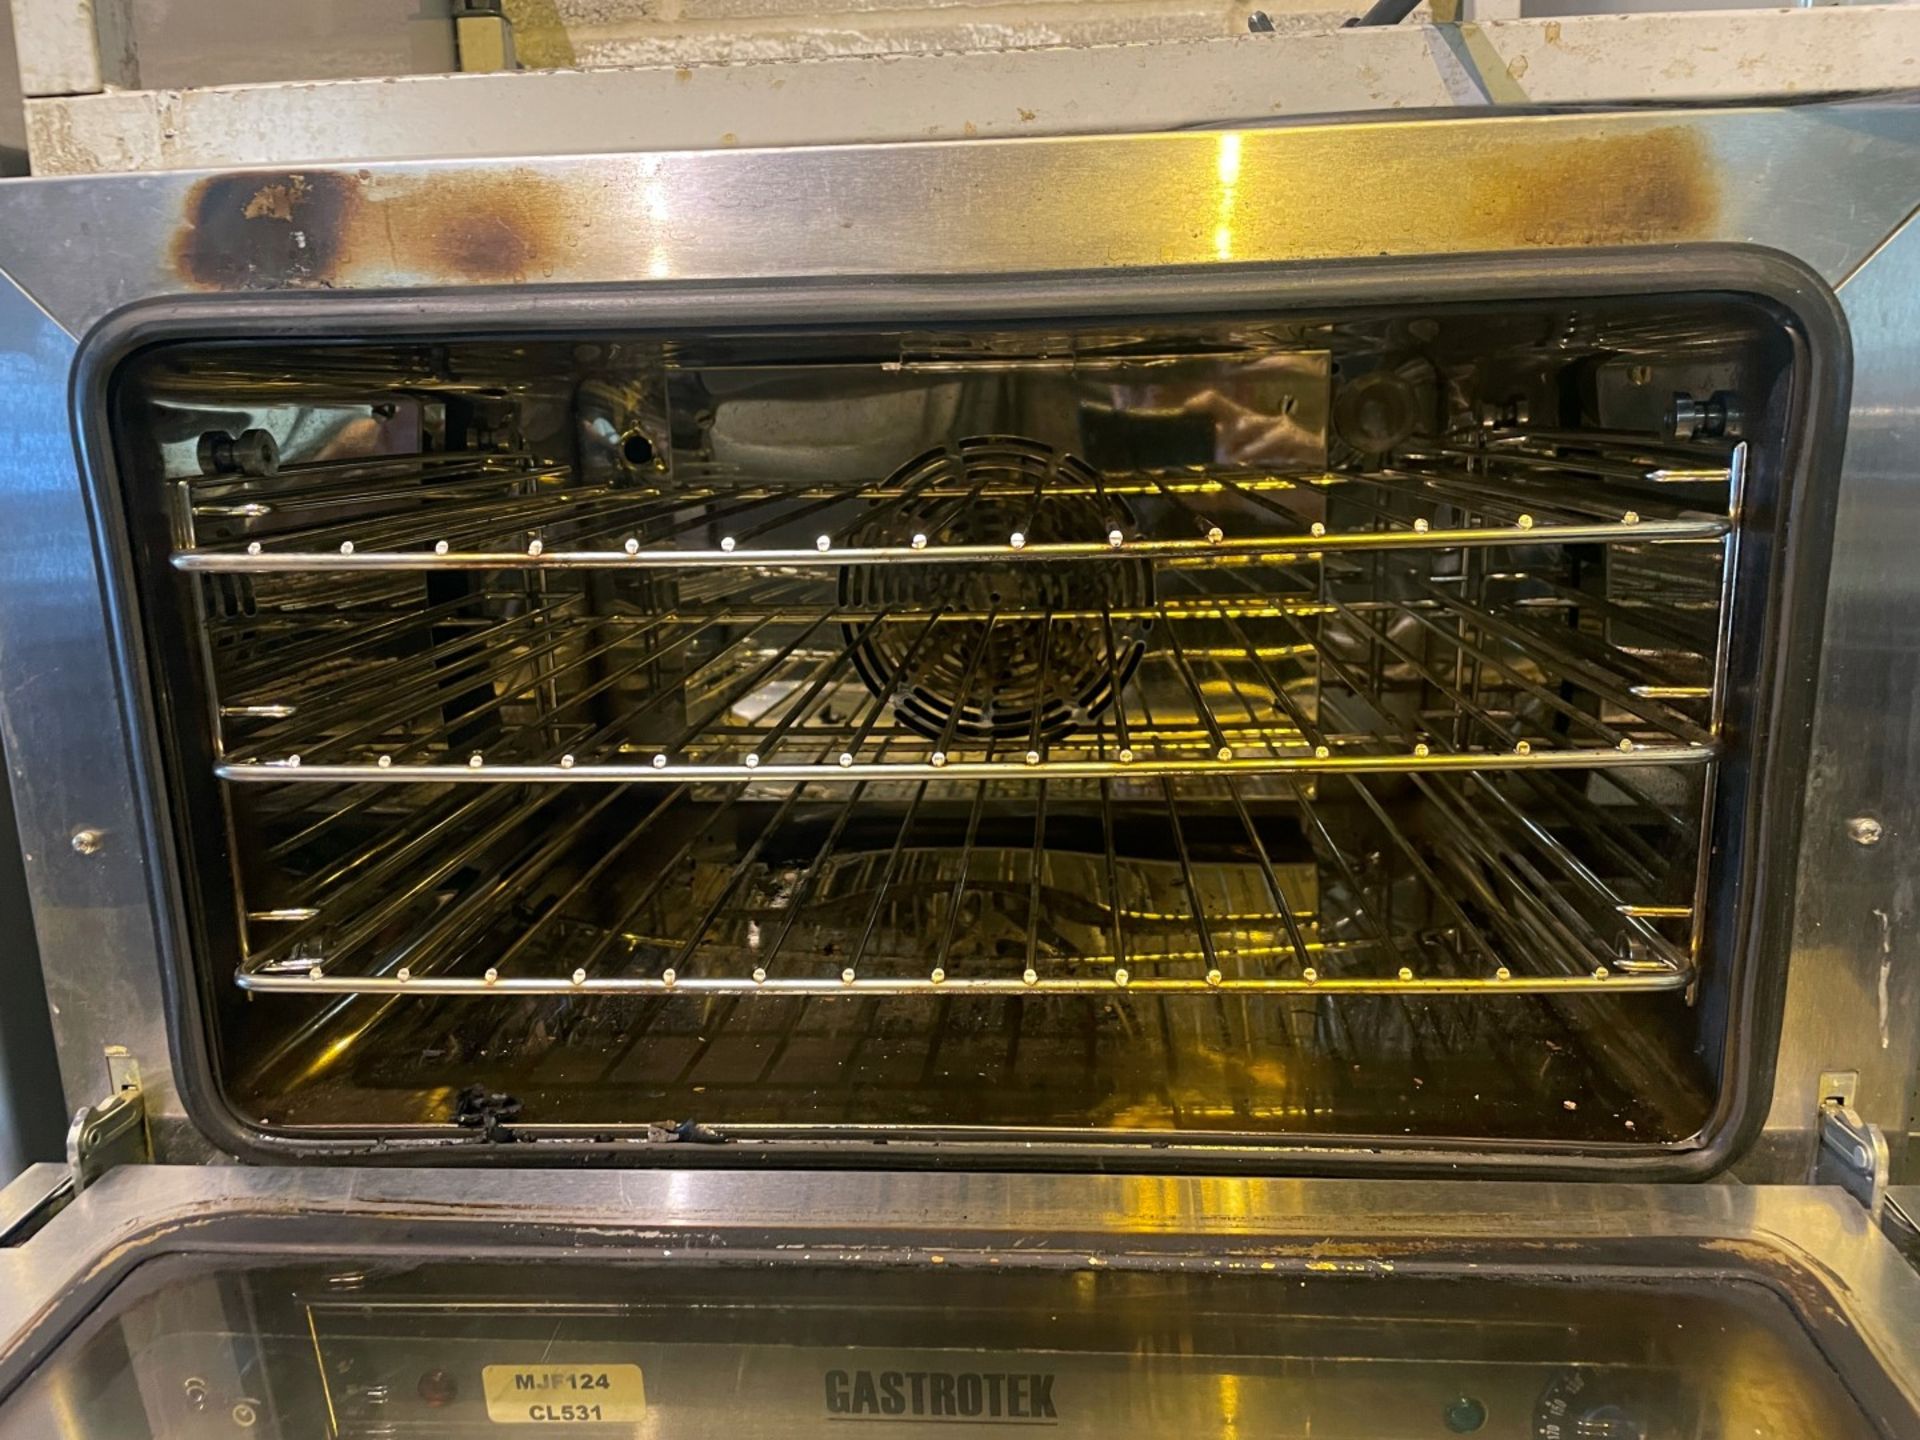 1 x Gastrotek Countertop Commercial Oven With a Stainless Steel Finish - Image 2 of 6